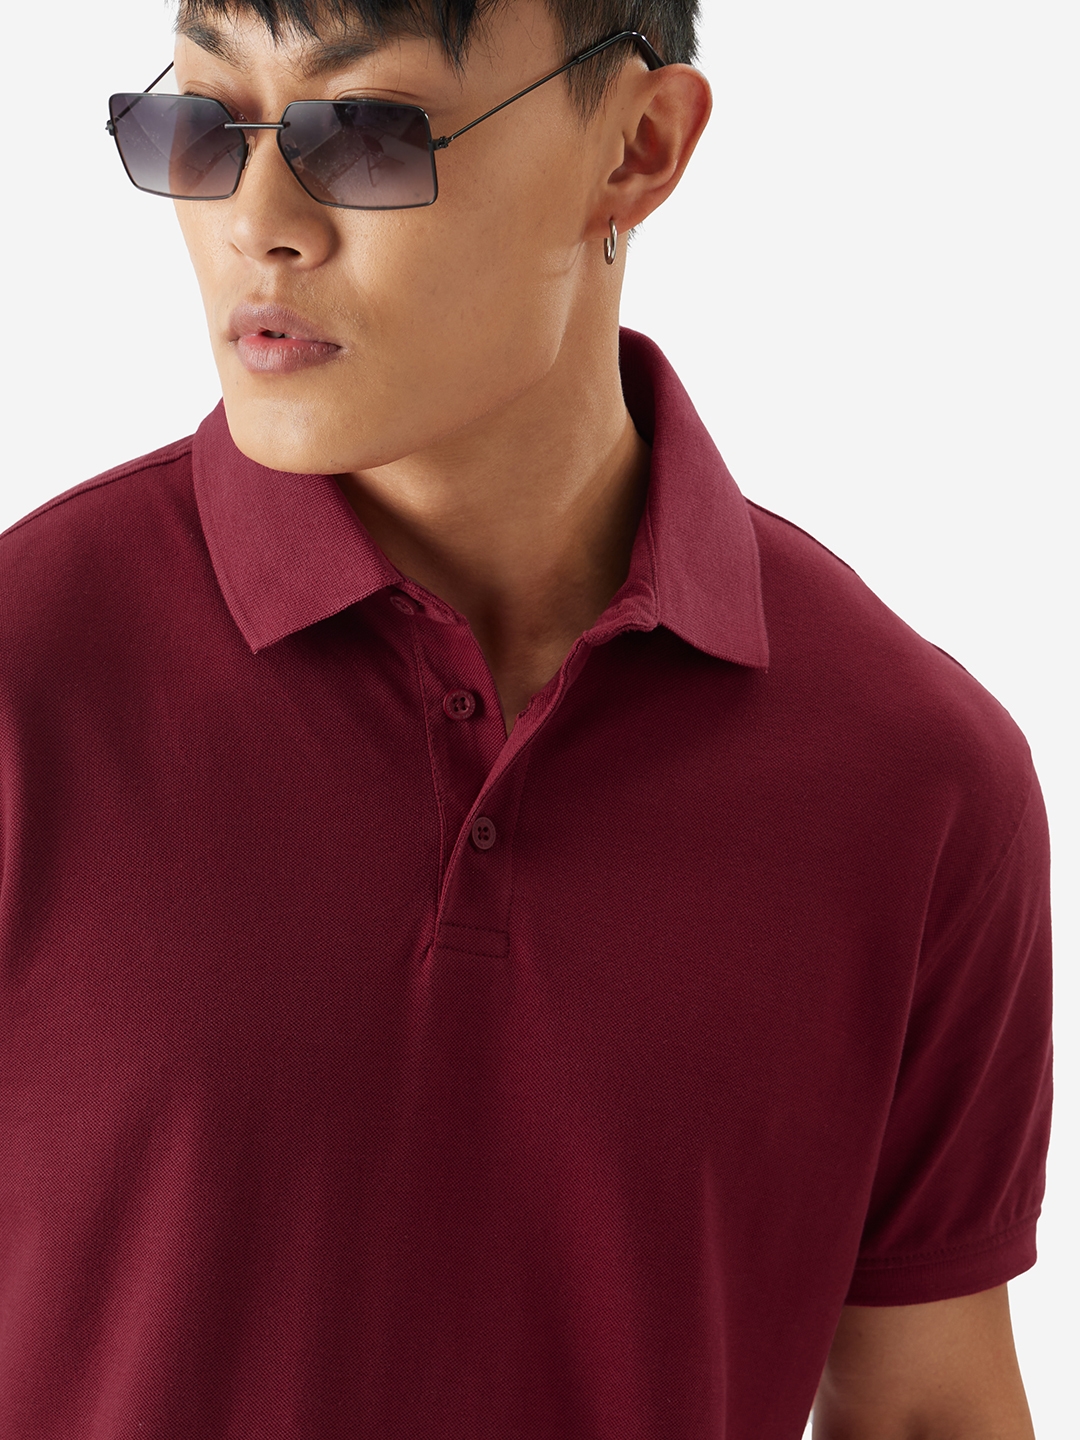 The Souled Store | Men's Solids: Rhubarb Polo T-Shirt